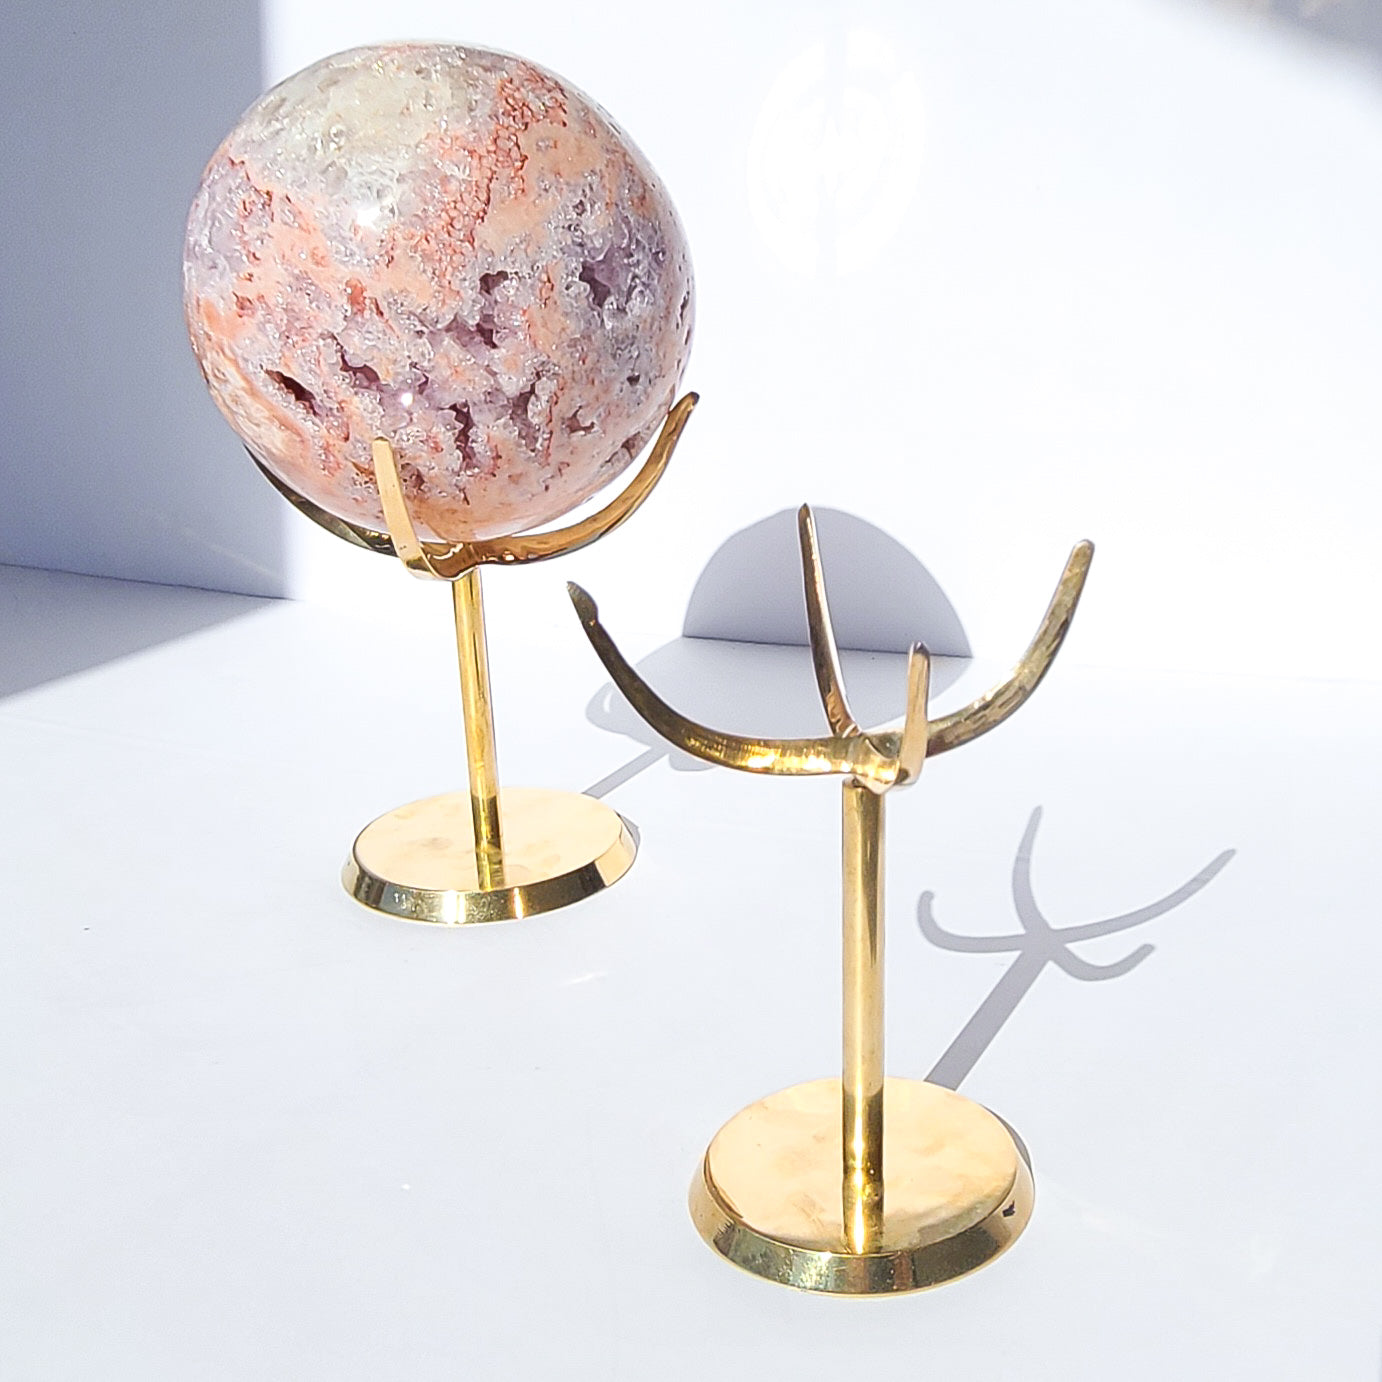 Gold sphere stand